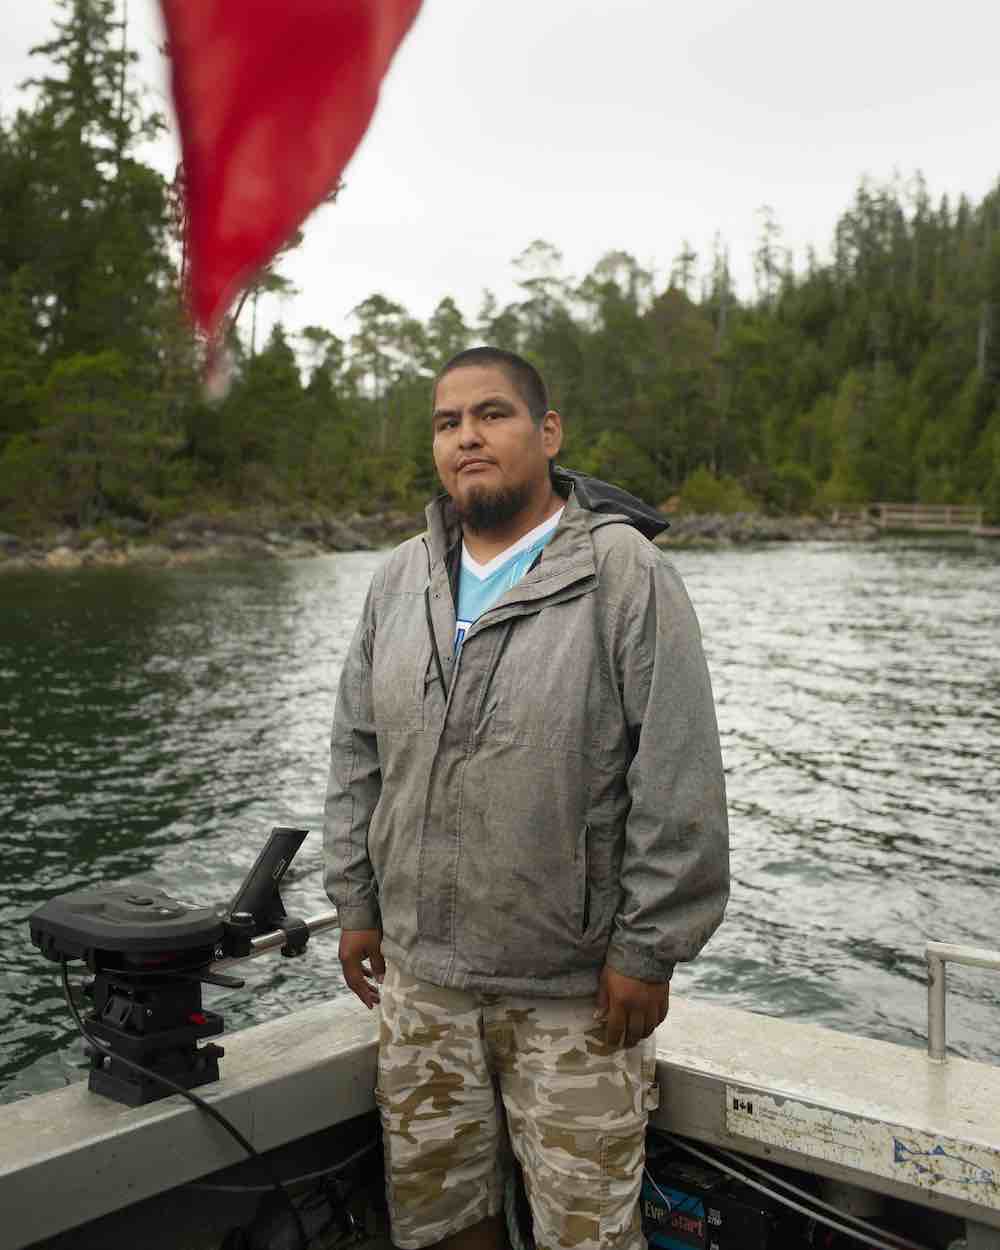 Sammy Williams stands aboard a fishing boat. He has medium skin tone, short dark hair in a buzz cut and a dark beard. He wears a grey rain jacket and beige camo shorts. A red flag hangs in the upper left quadrant of the foreground.